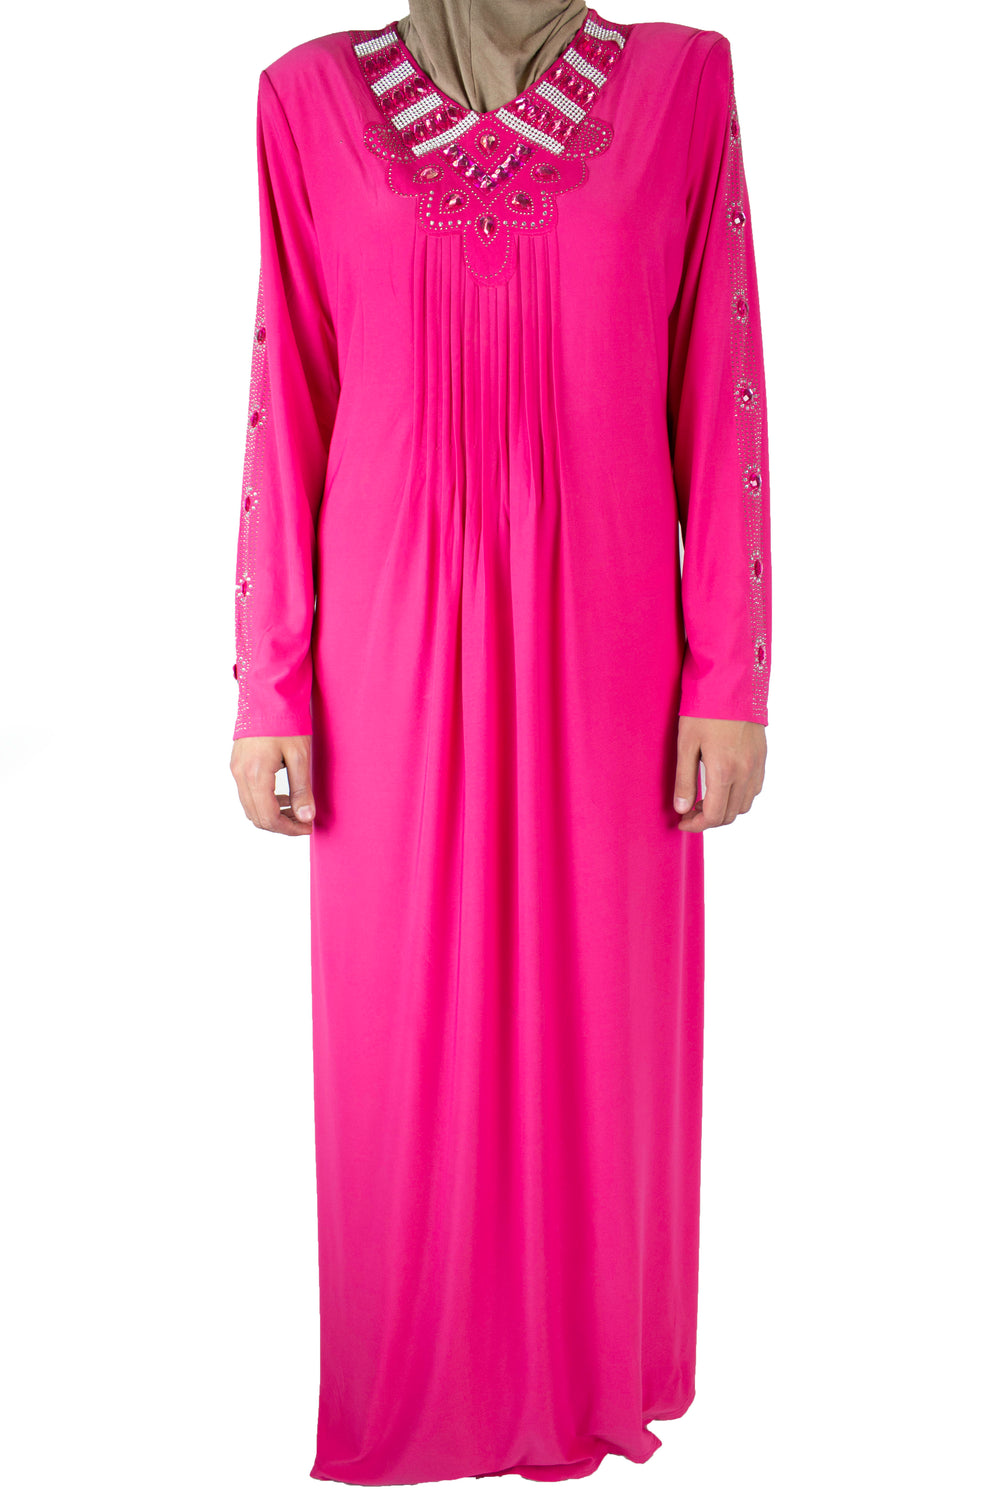 pink abaya with pleats on the chest and jewels along the neckline and arms